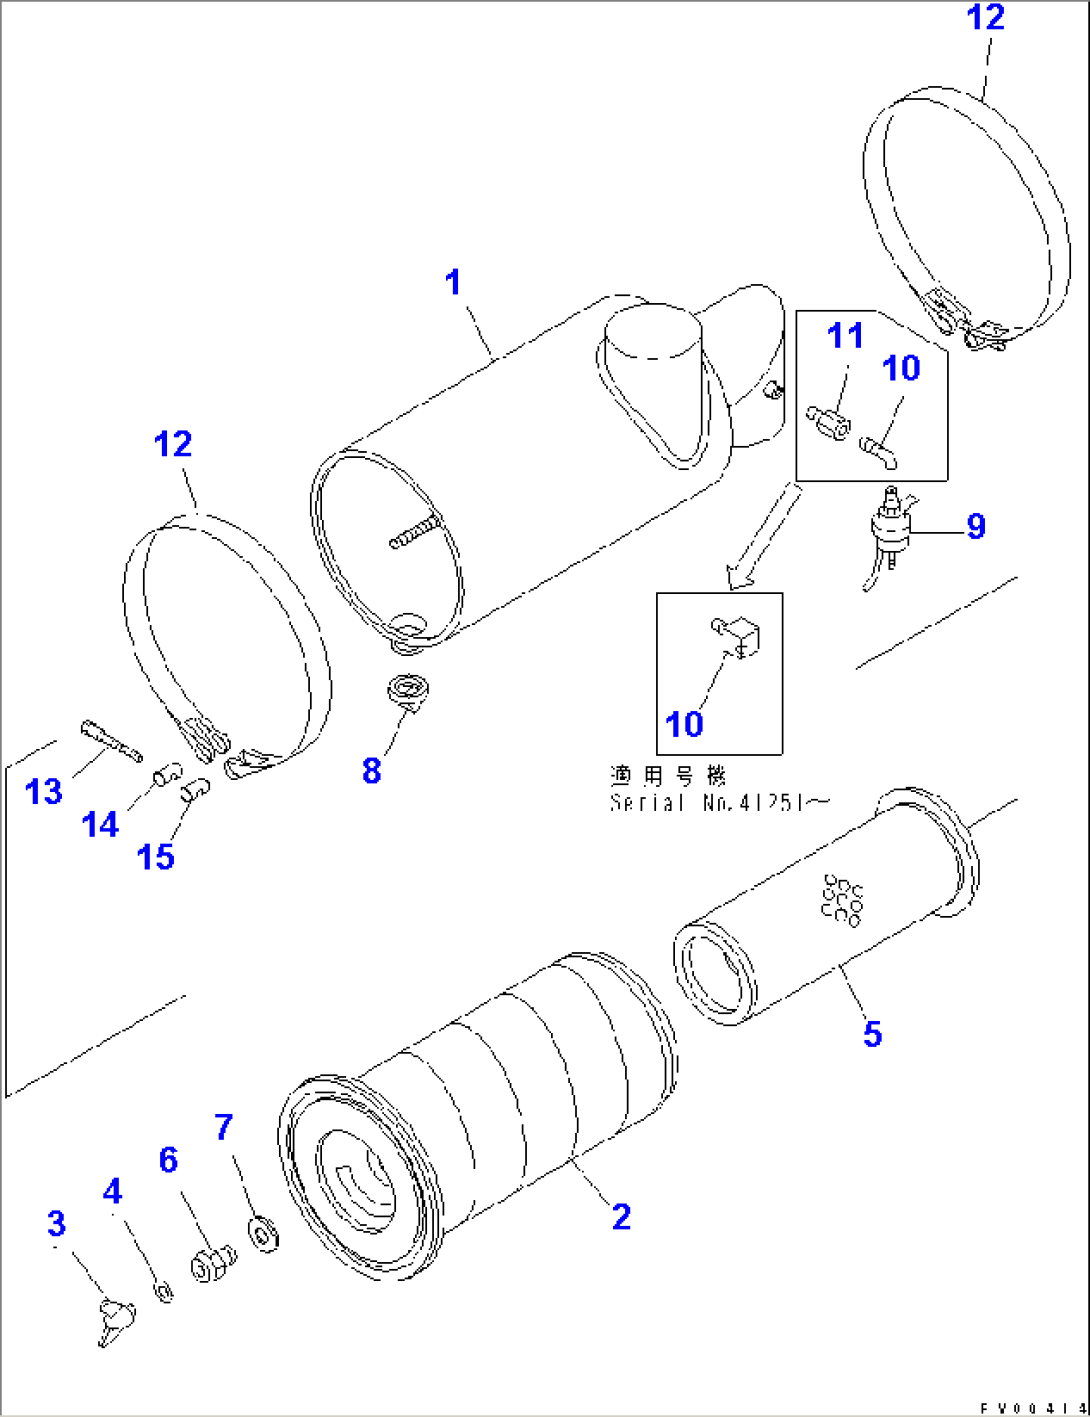 AIR CLEANER (FORWARDED INDIVIDUALLY PARTS)